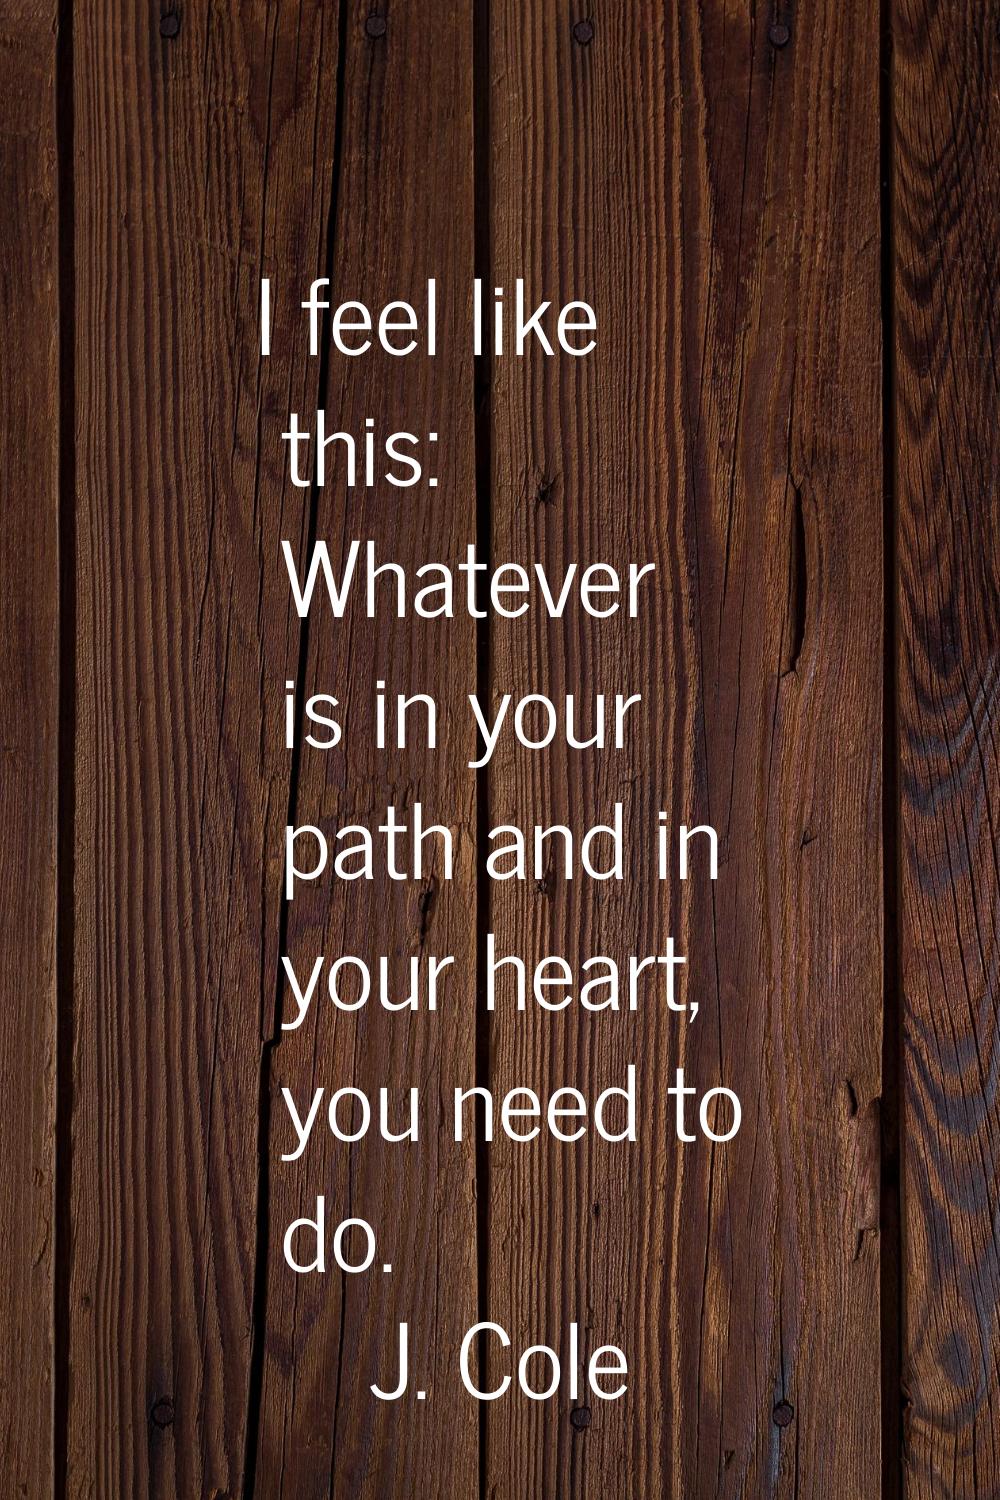 I feel like this: Whatever is in your path and in your heart, you need to do.